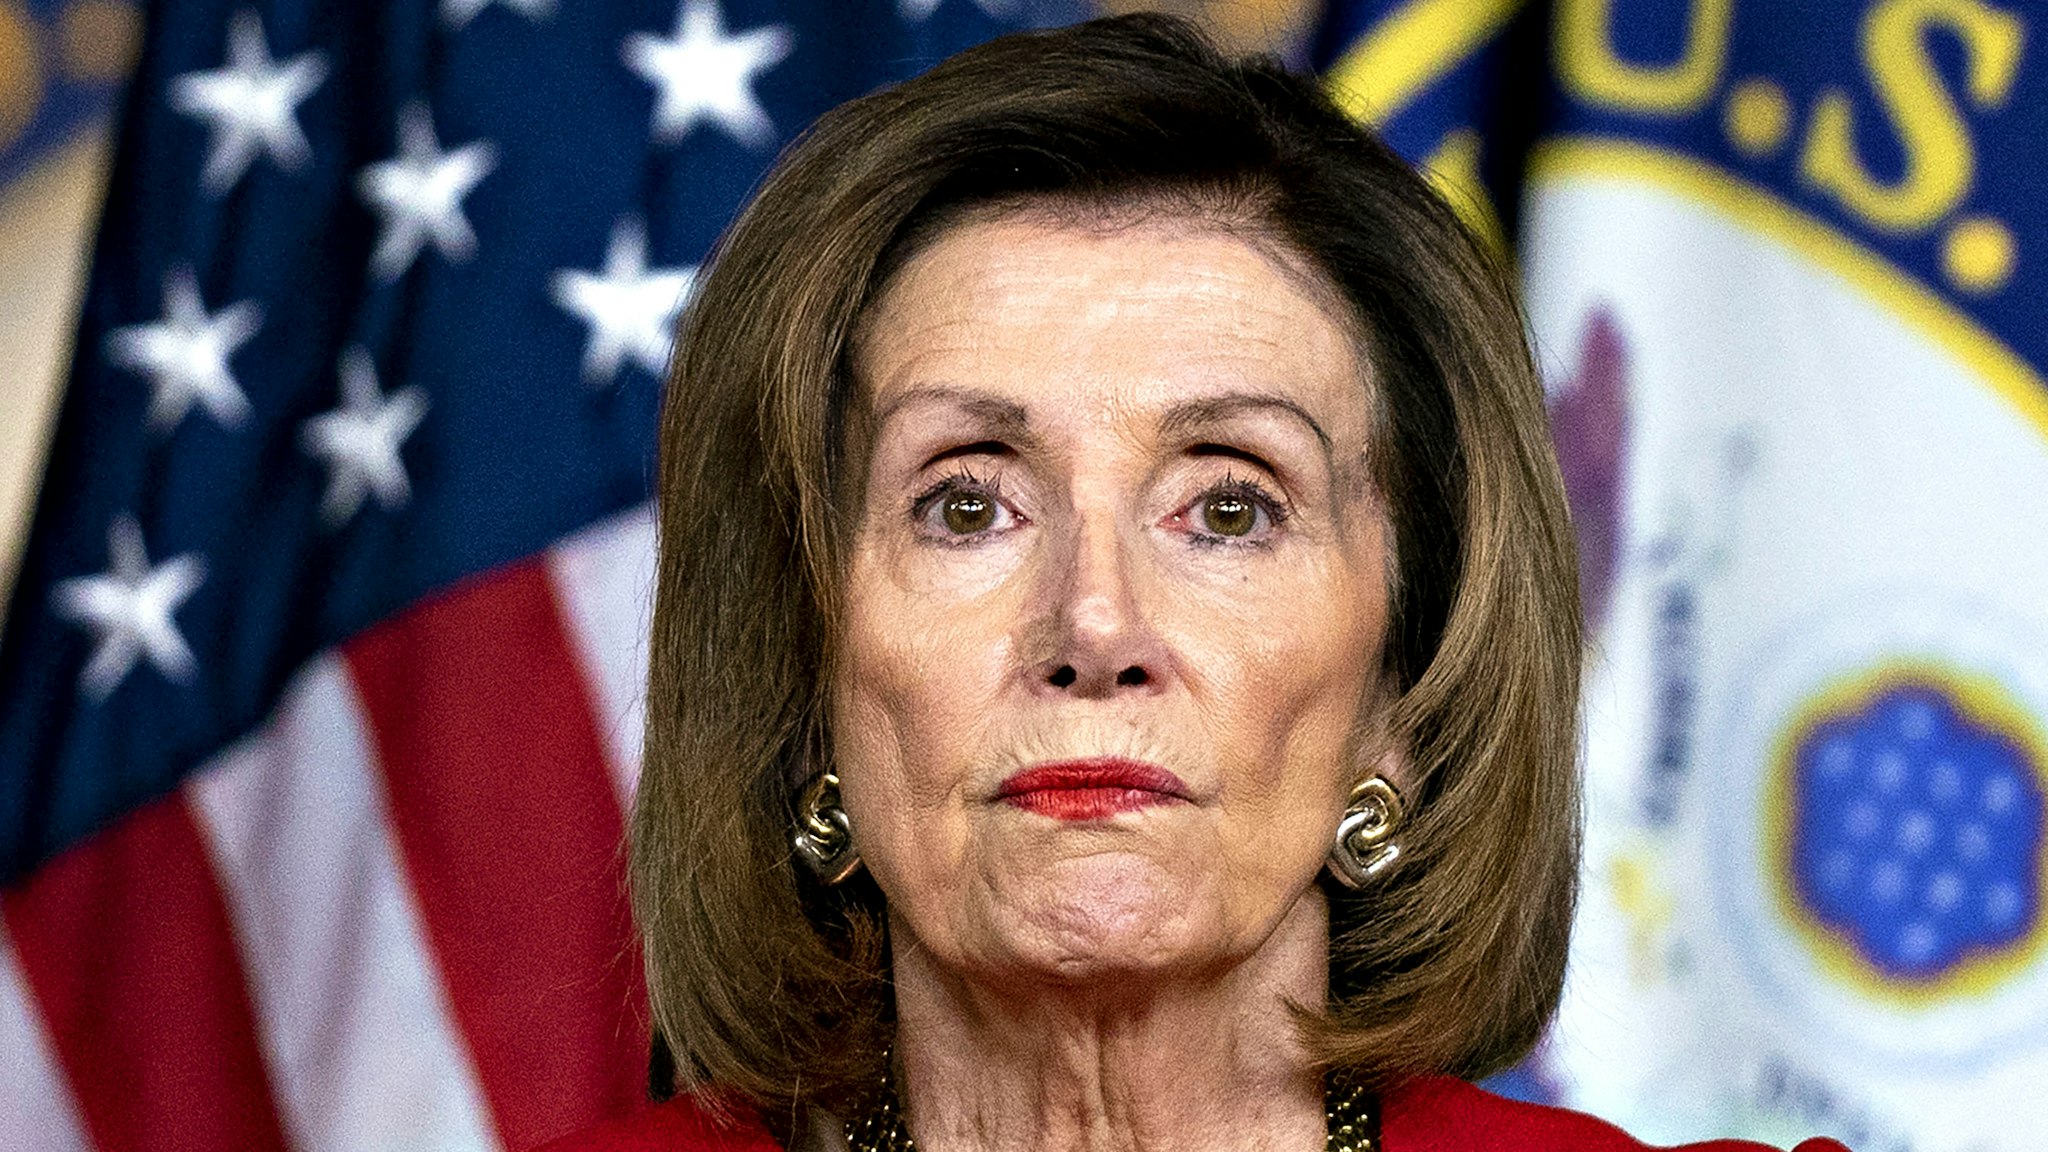 U.S. House Speaker Nancy Pelosi, a Democrat from California, pauses while speaking during a news conference on Capitol Hill in Washington, D.C., U.S., on Thursday, Dec. 19, 2019. Pelosi's carefully scripted impeachment of Donald Trump took an unexpected turn an hour after she banged the gavel Wednesday night, as she opened the door to stalling a Senate trial on whether the president should be removed from office.